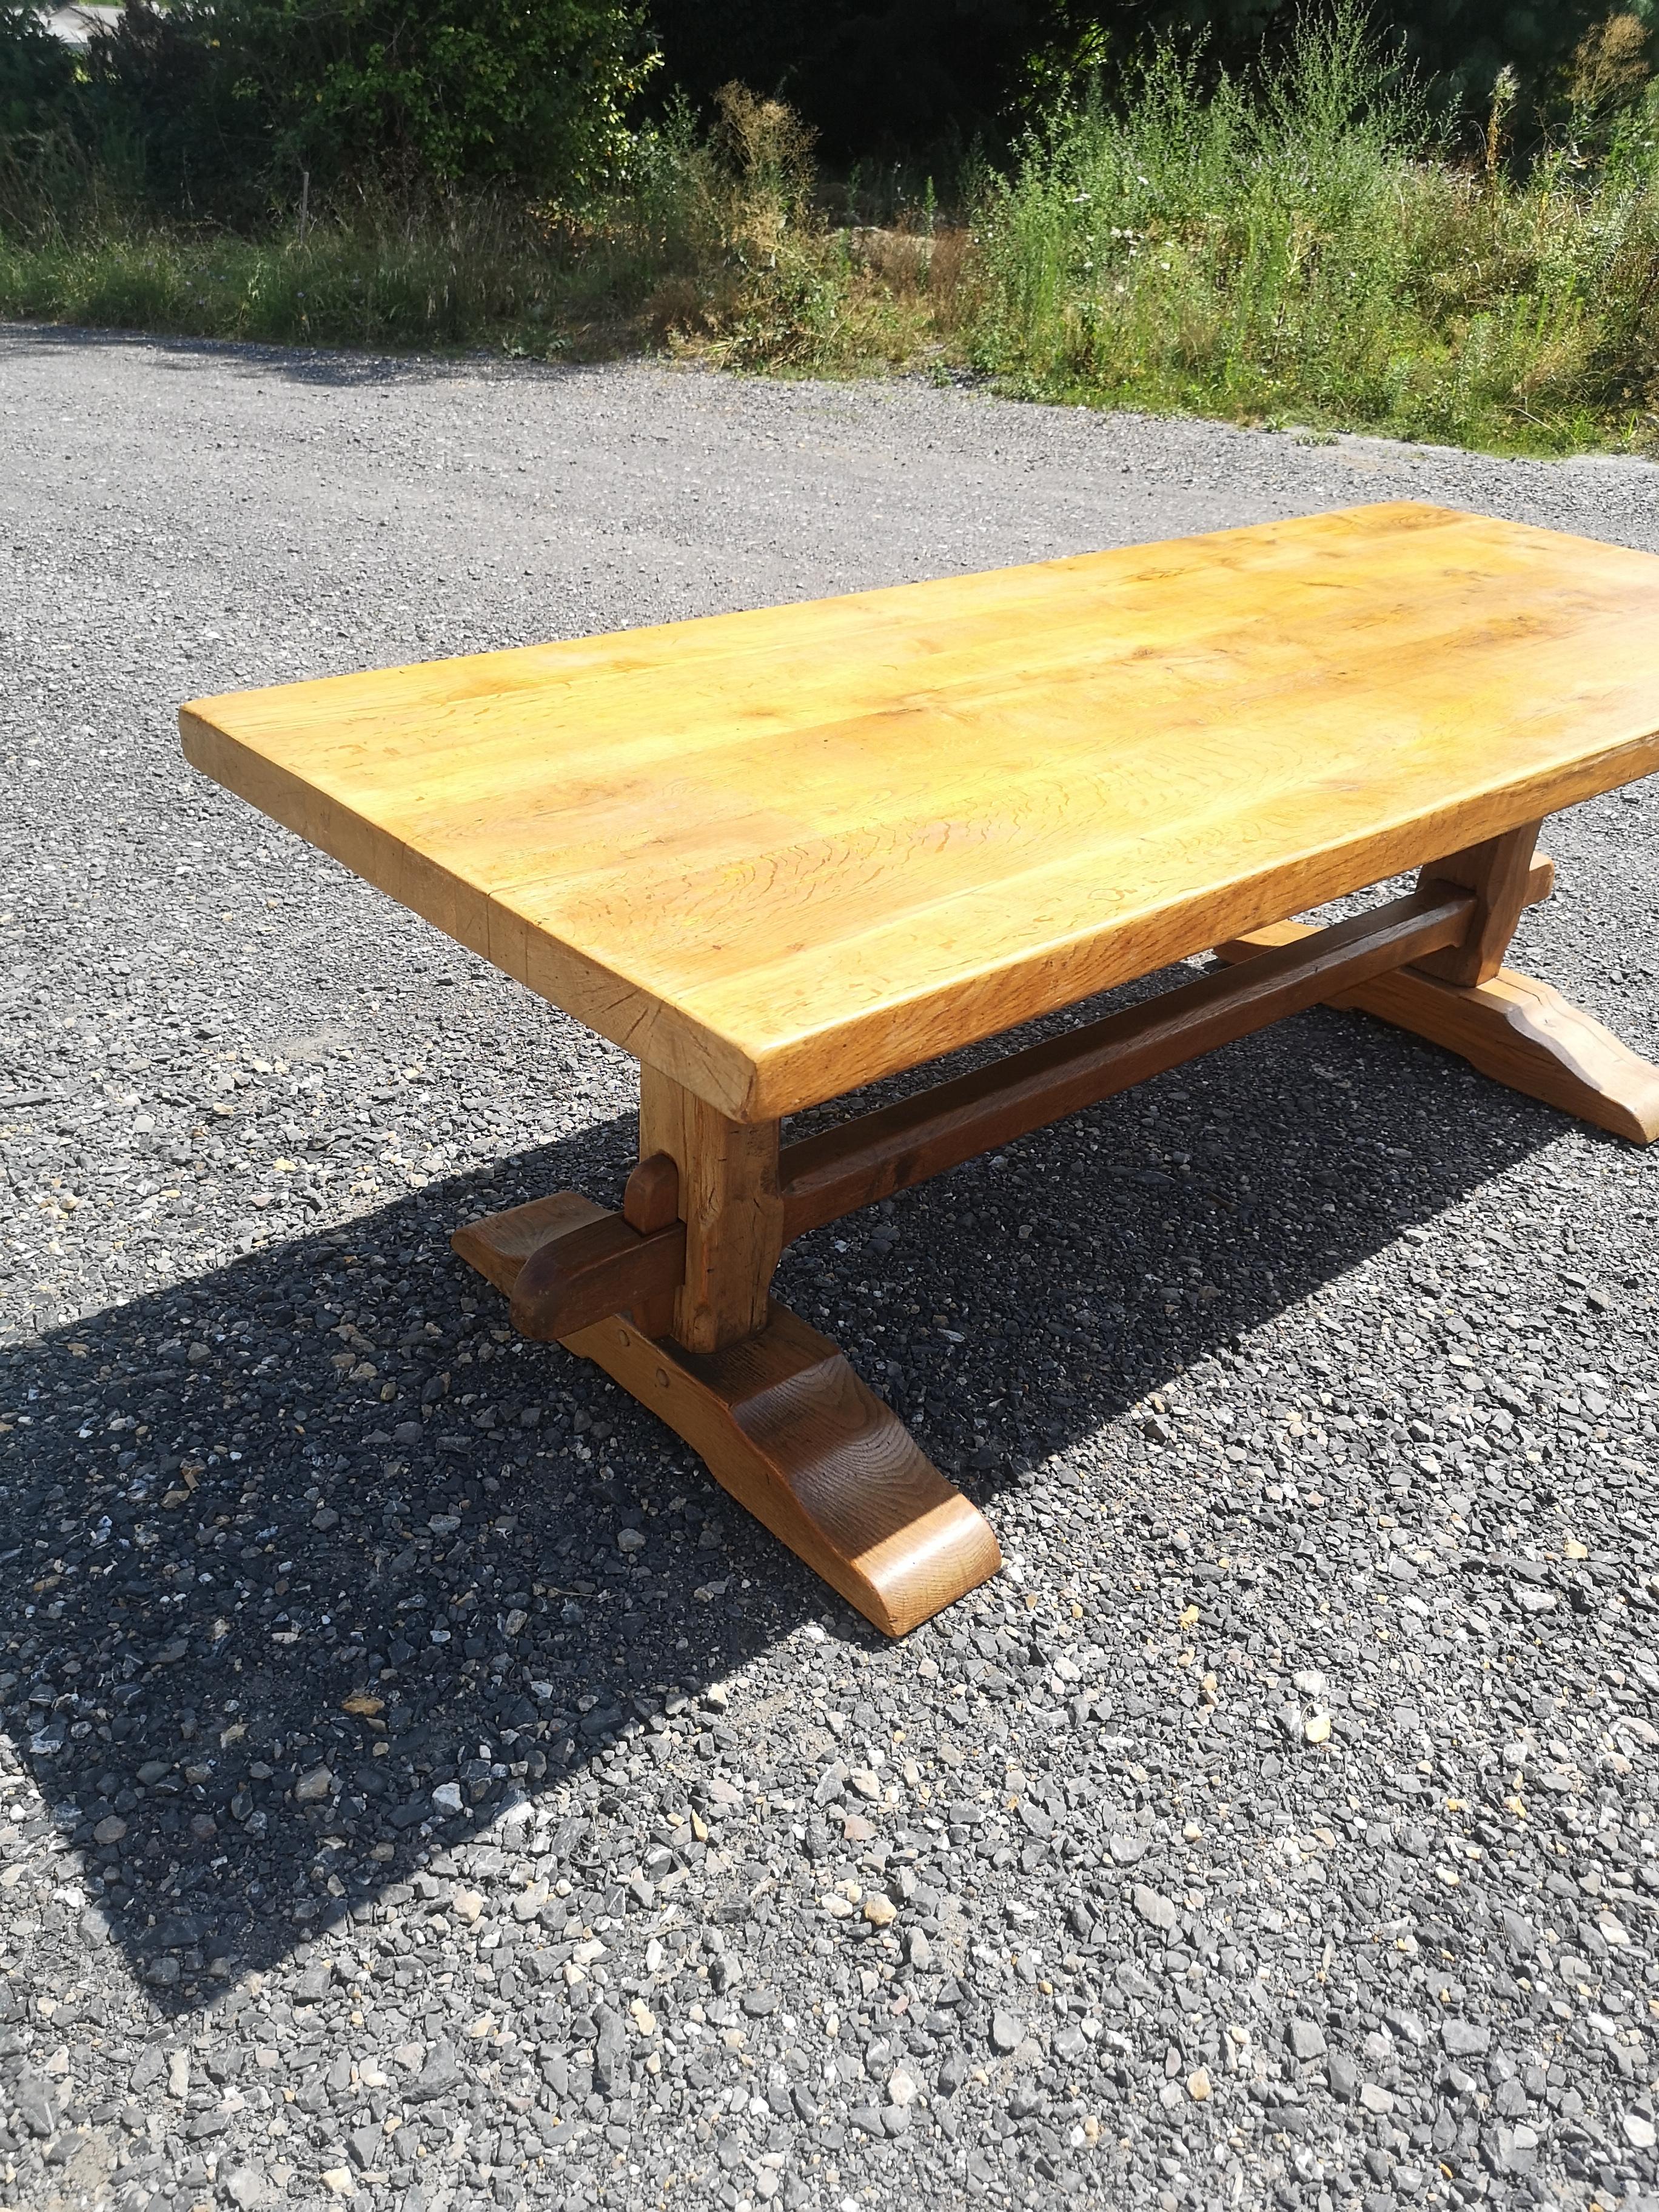 magnificent and imposing monastery table in solid oak tenon and mortise assembly circa 1900 thickness top 6.5 cm.Very nice honey-coloured patina.Very straight geometric lines that give a brutalist side to this magnificent table.

The rustic style